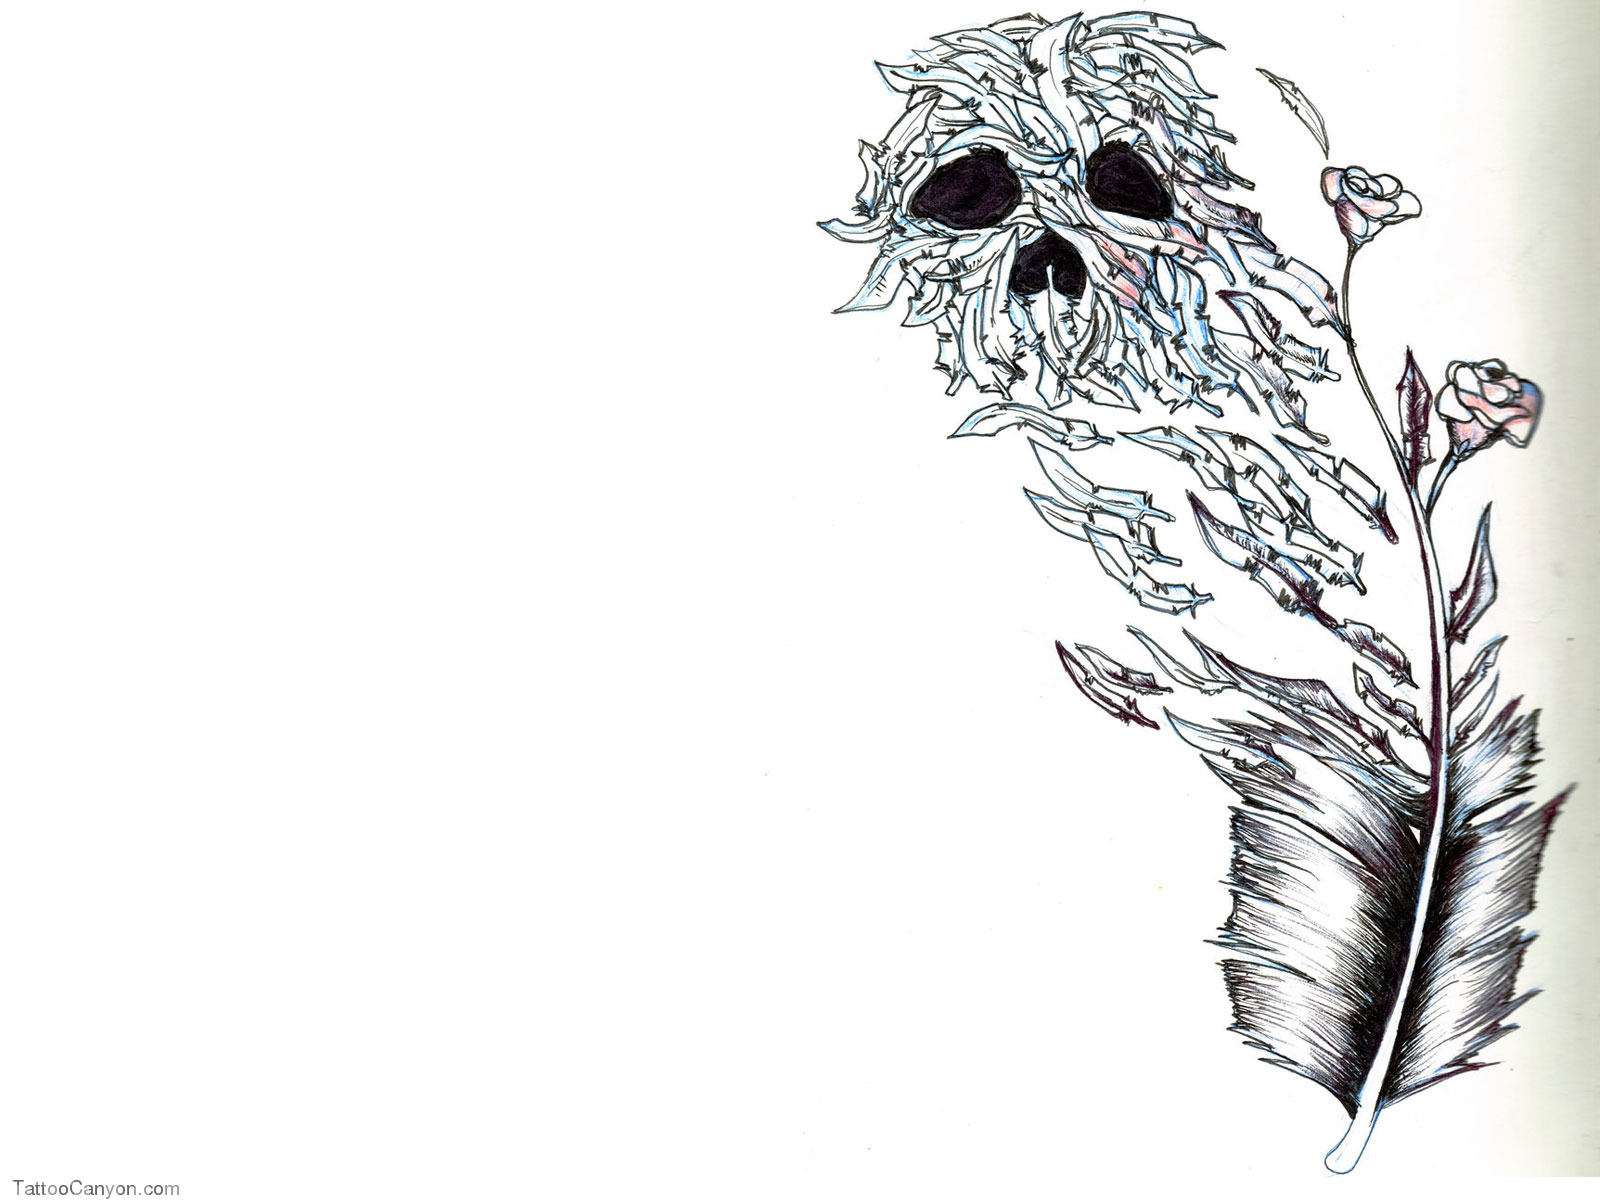 Designs Feather And Skull Tattoo Wallpaper Design